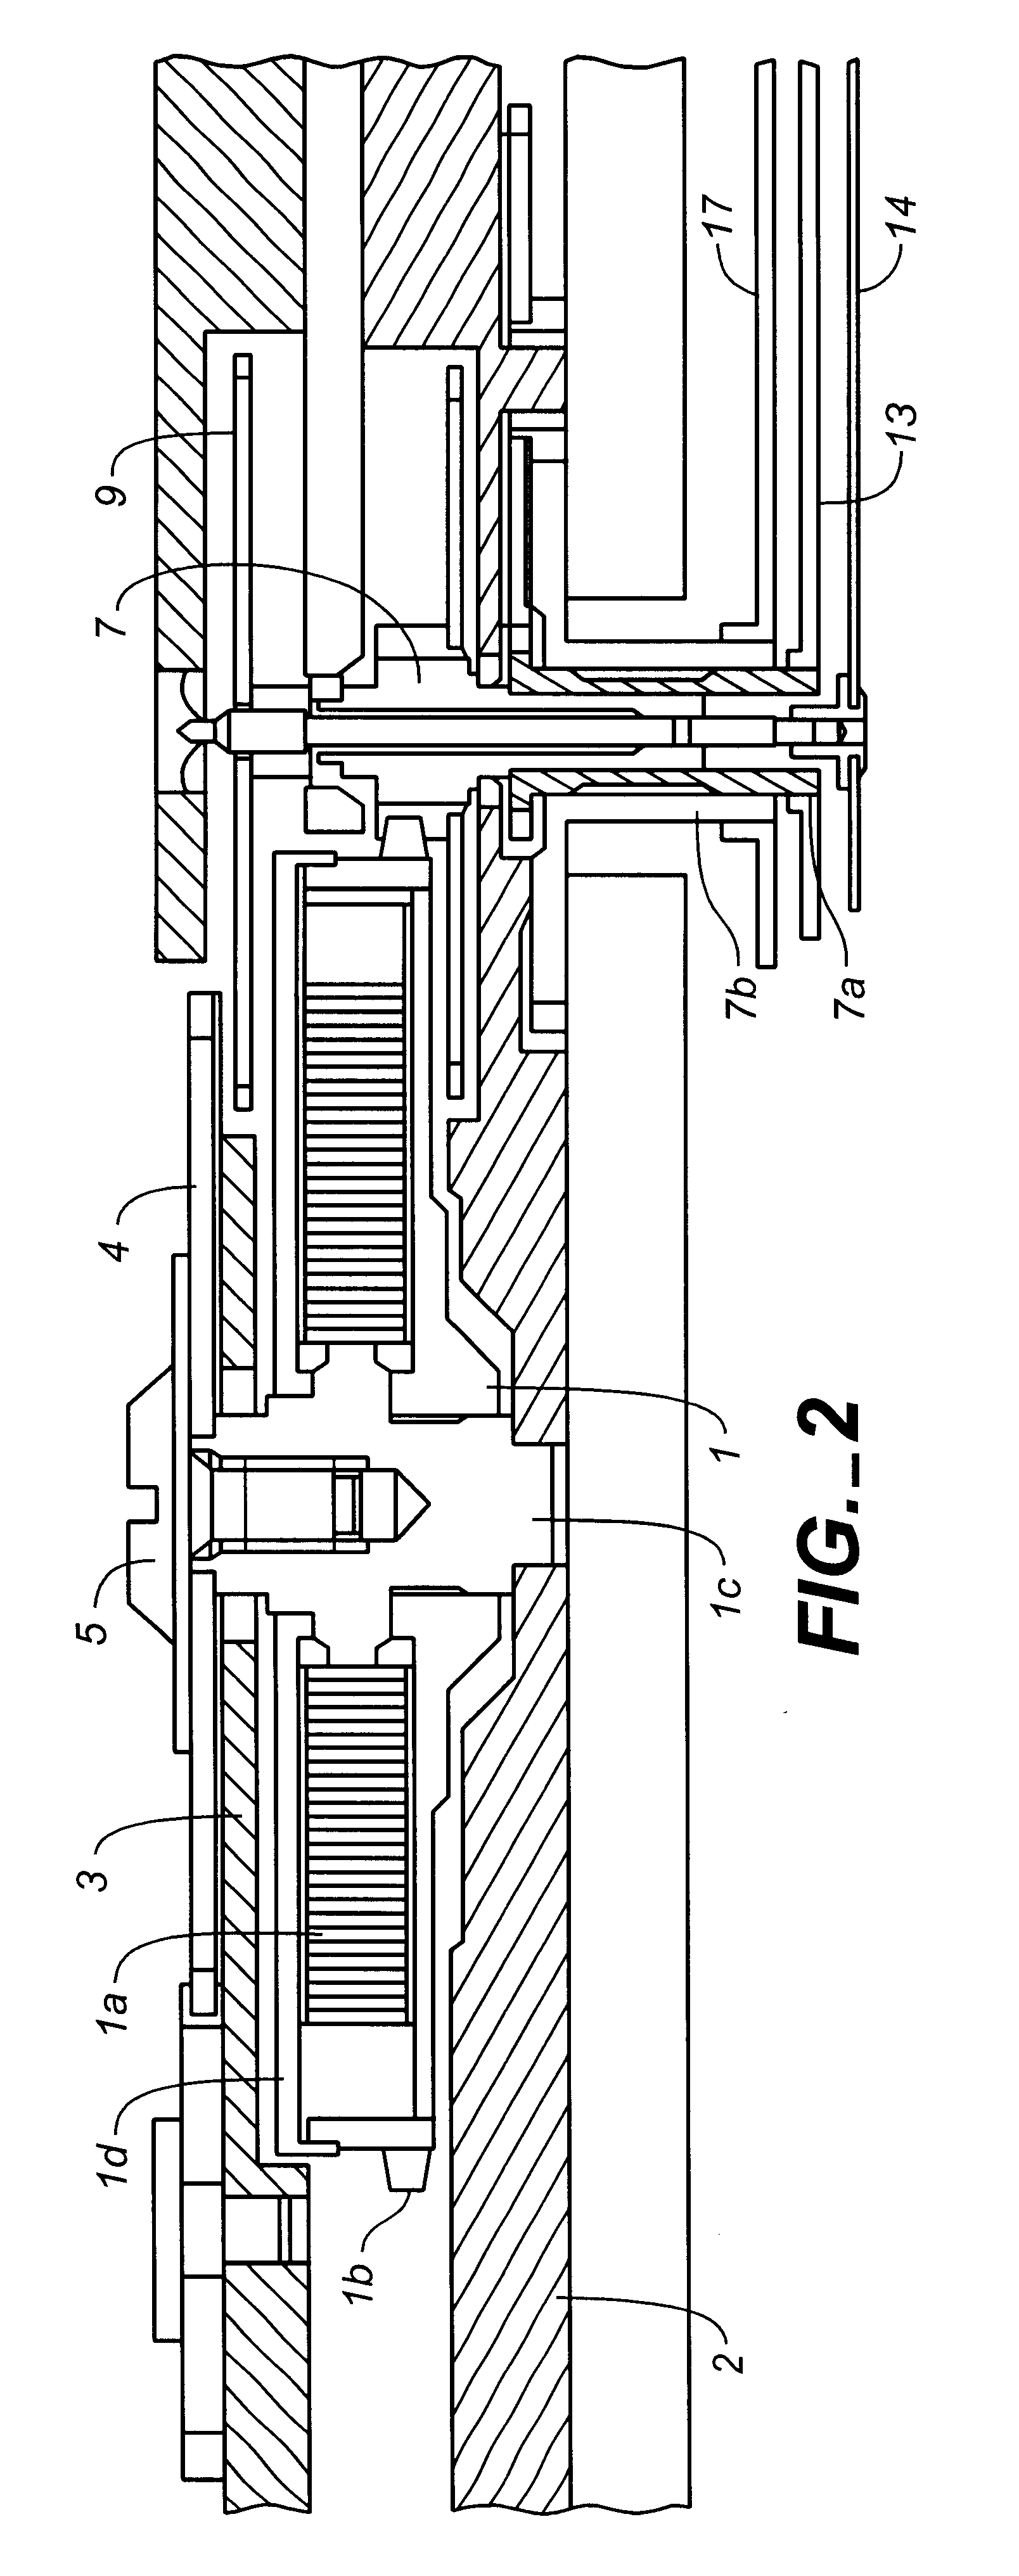 Electronic device with variable chopping signal and duty ratio selection for strong braking